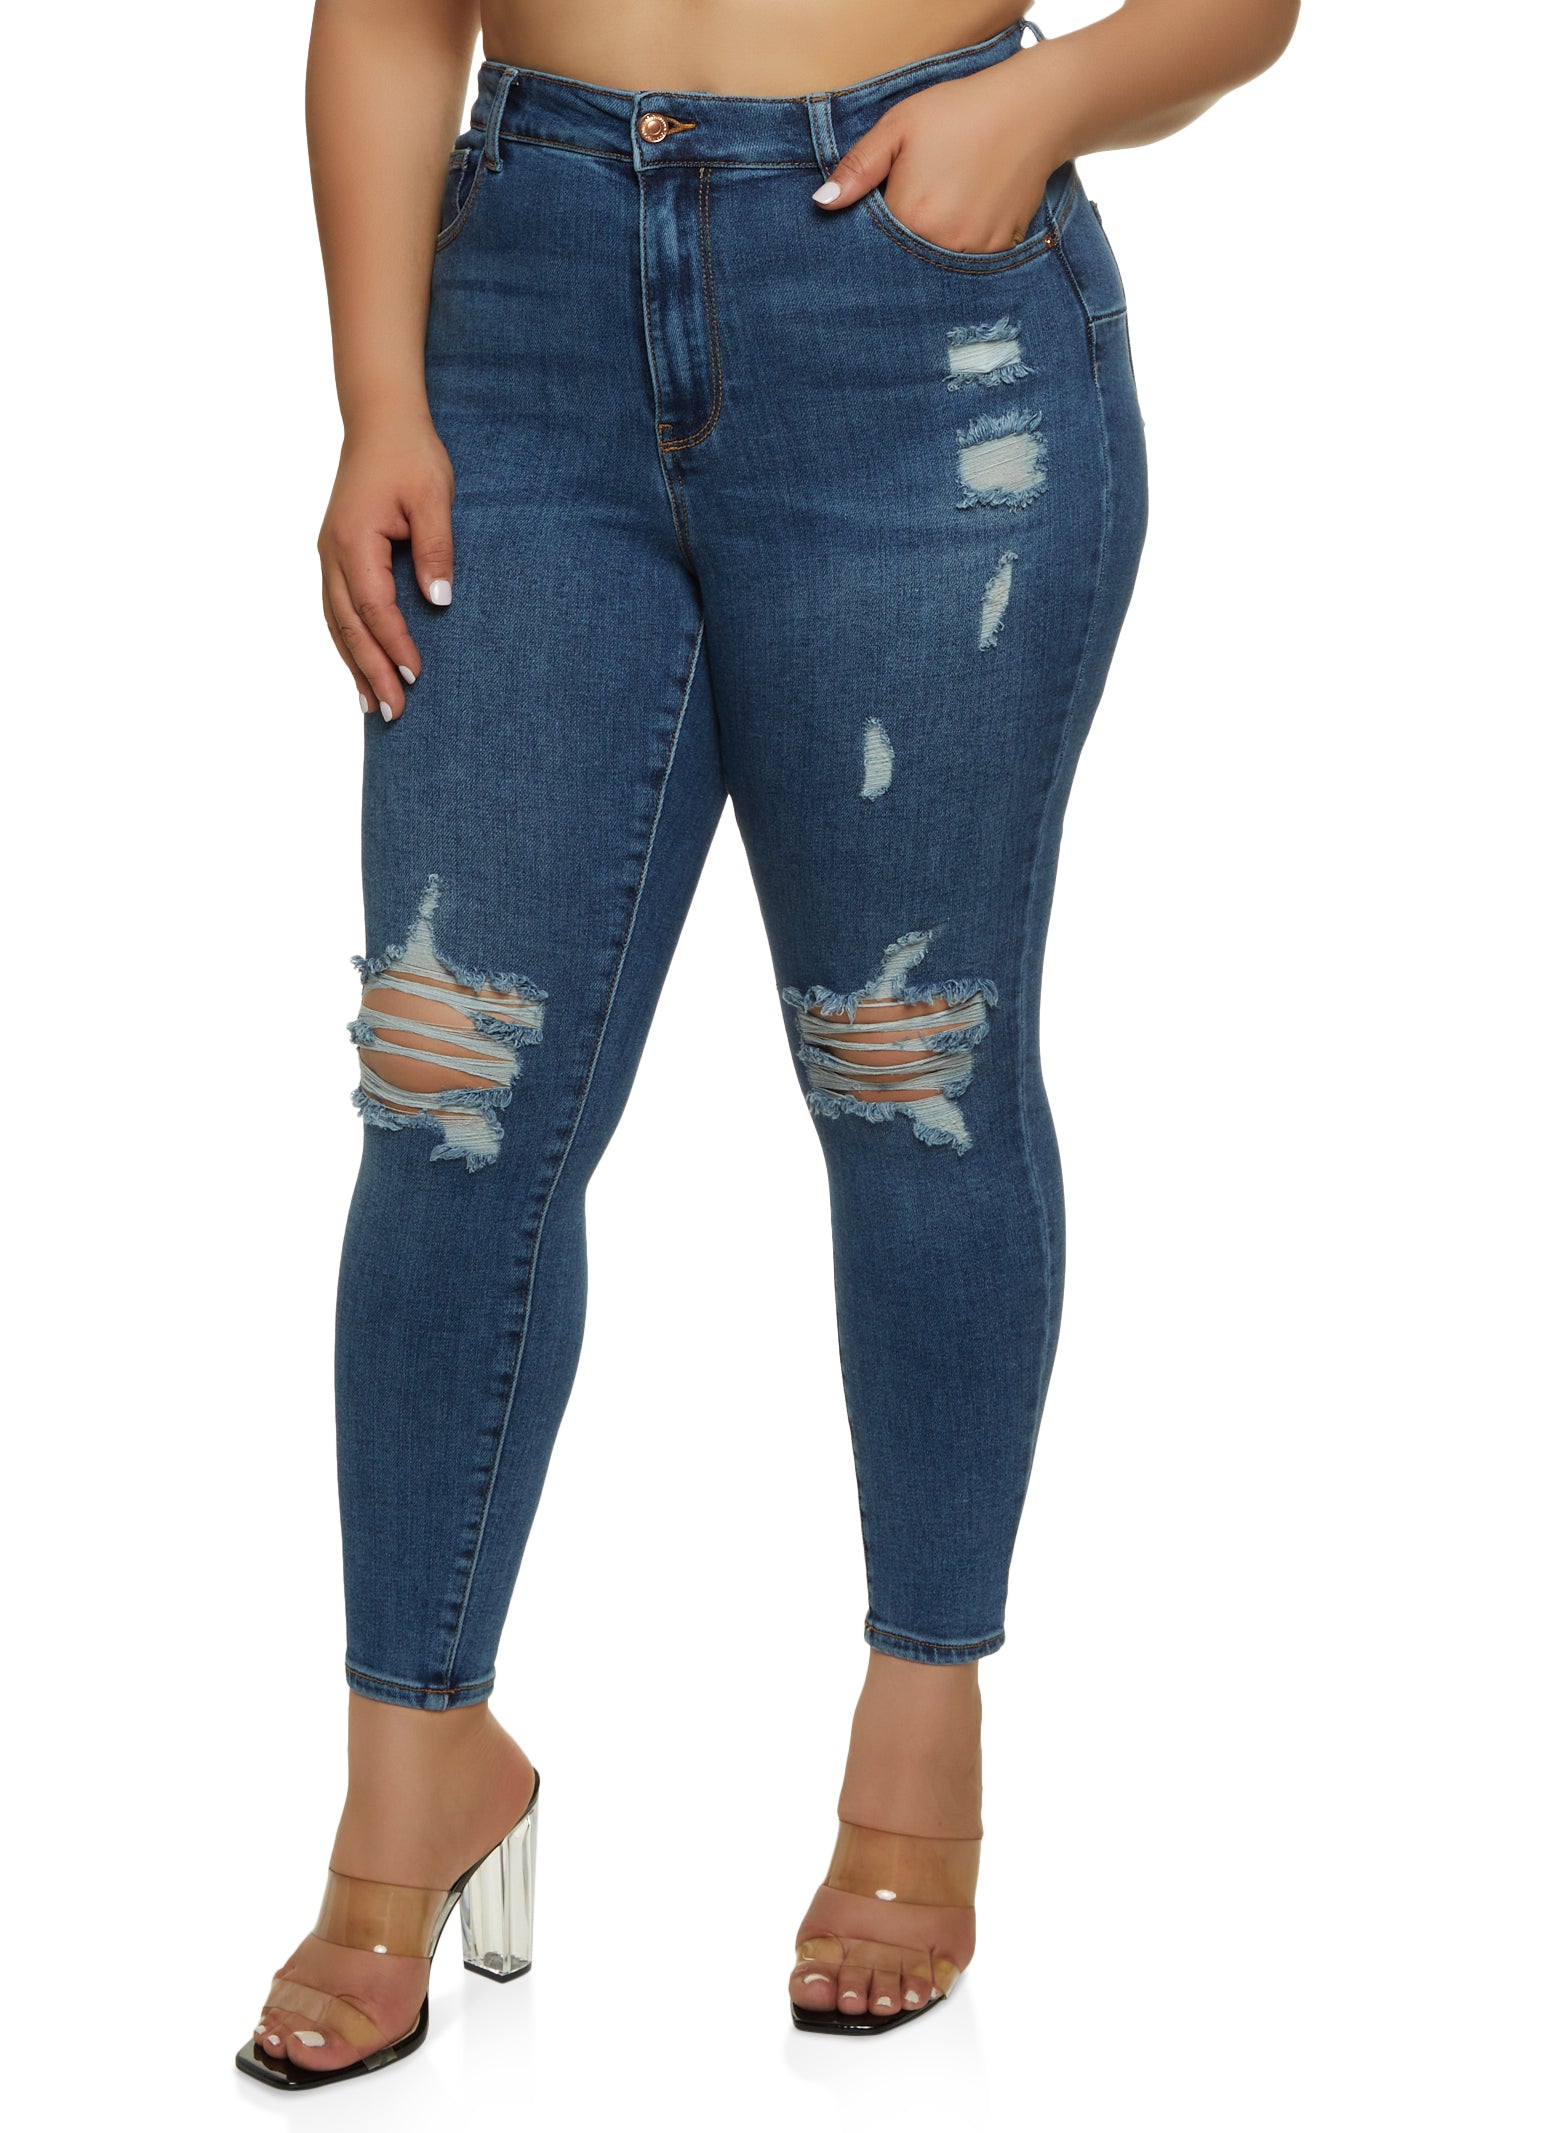 Womens Plus Size WAX Distressed High Waisted Skinny Jeans, Blue, Size 20